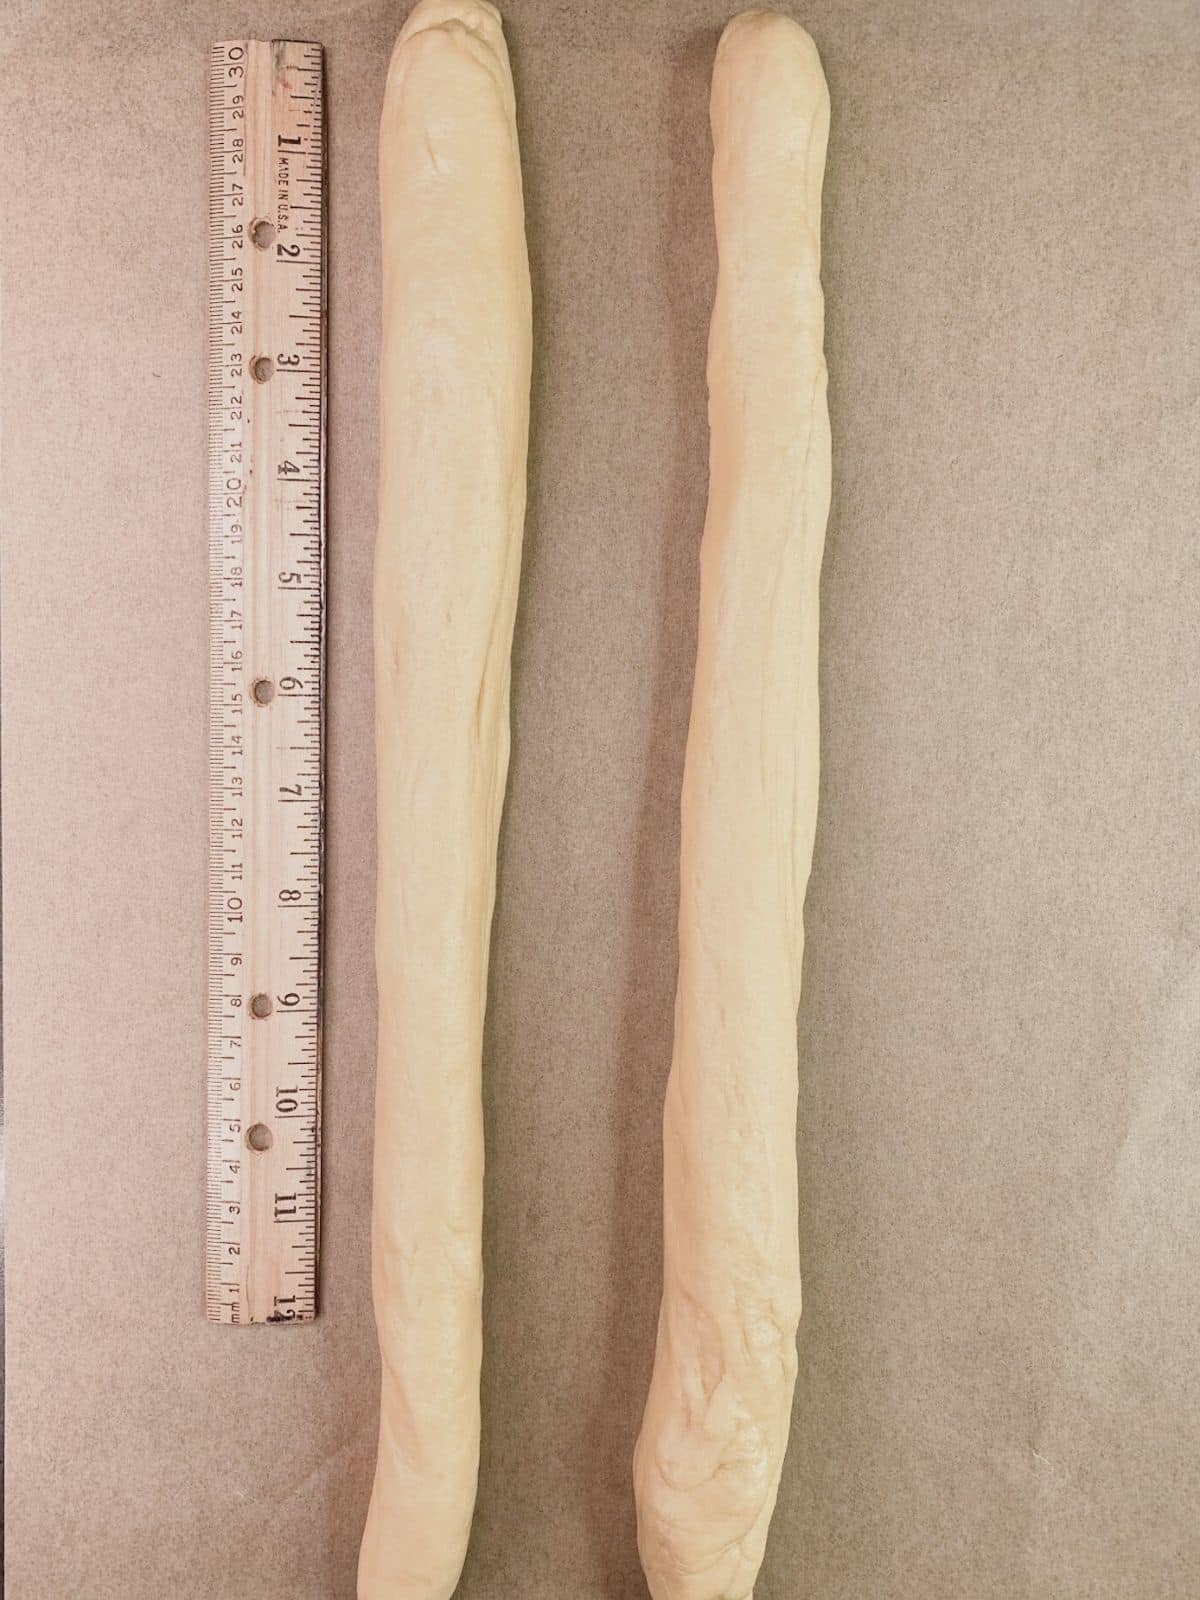 2 logs of raw dough with ruler.